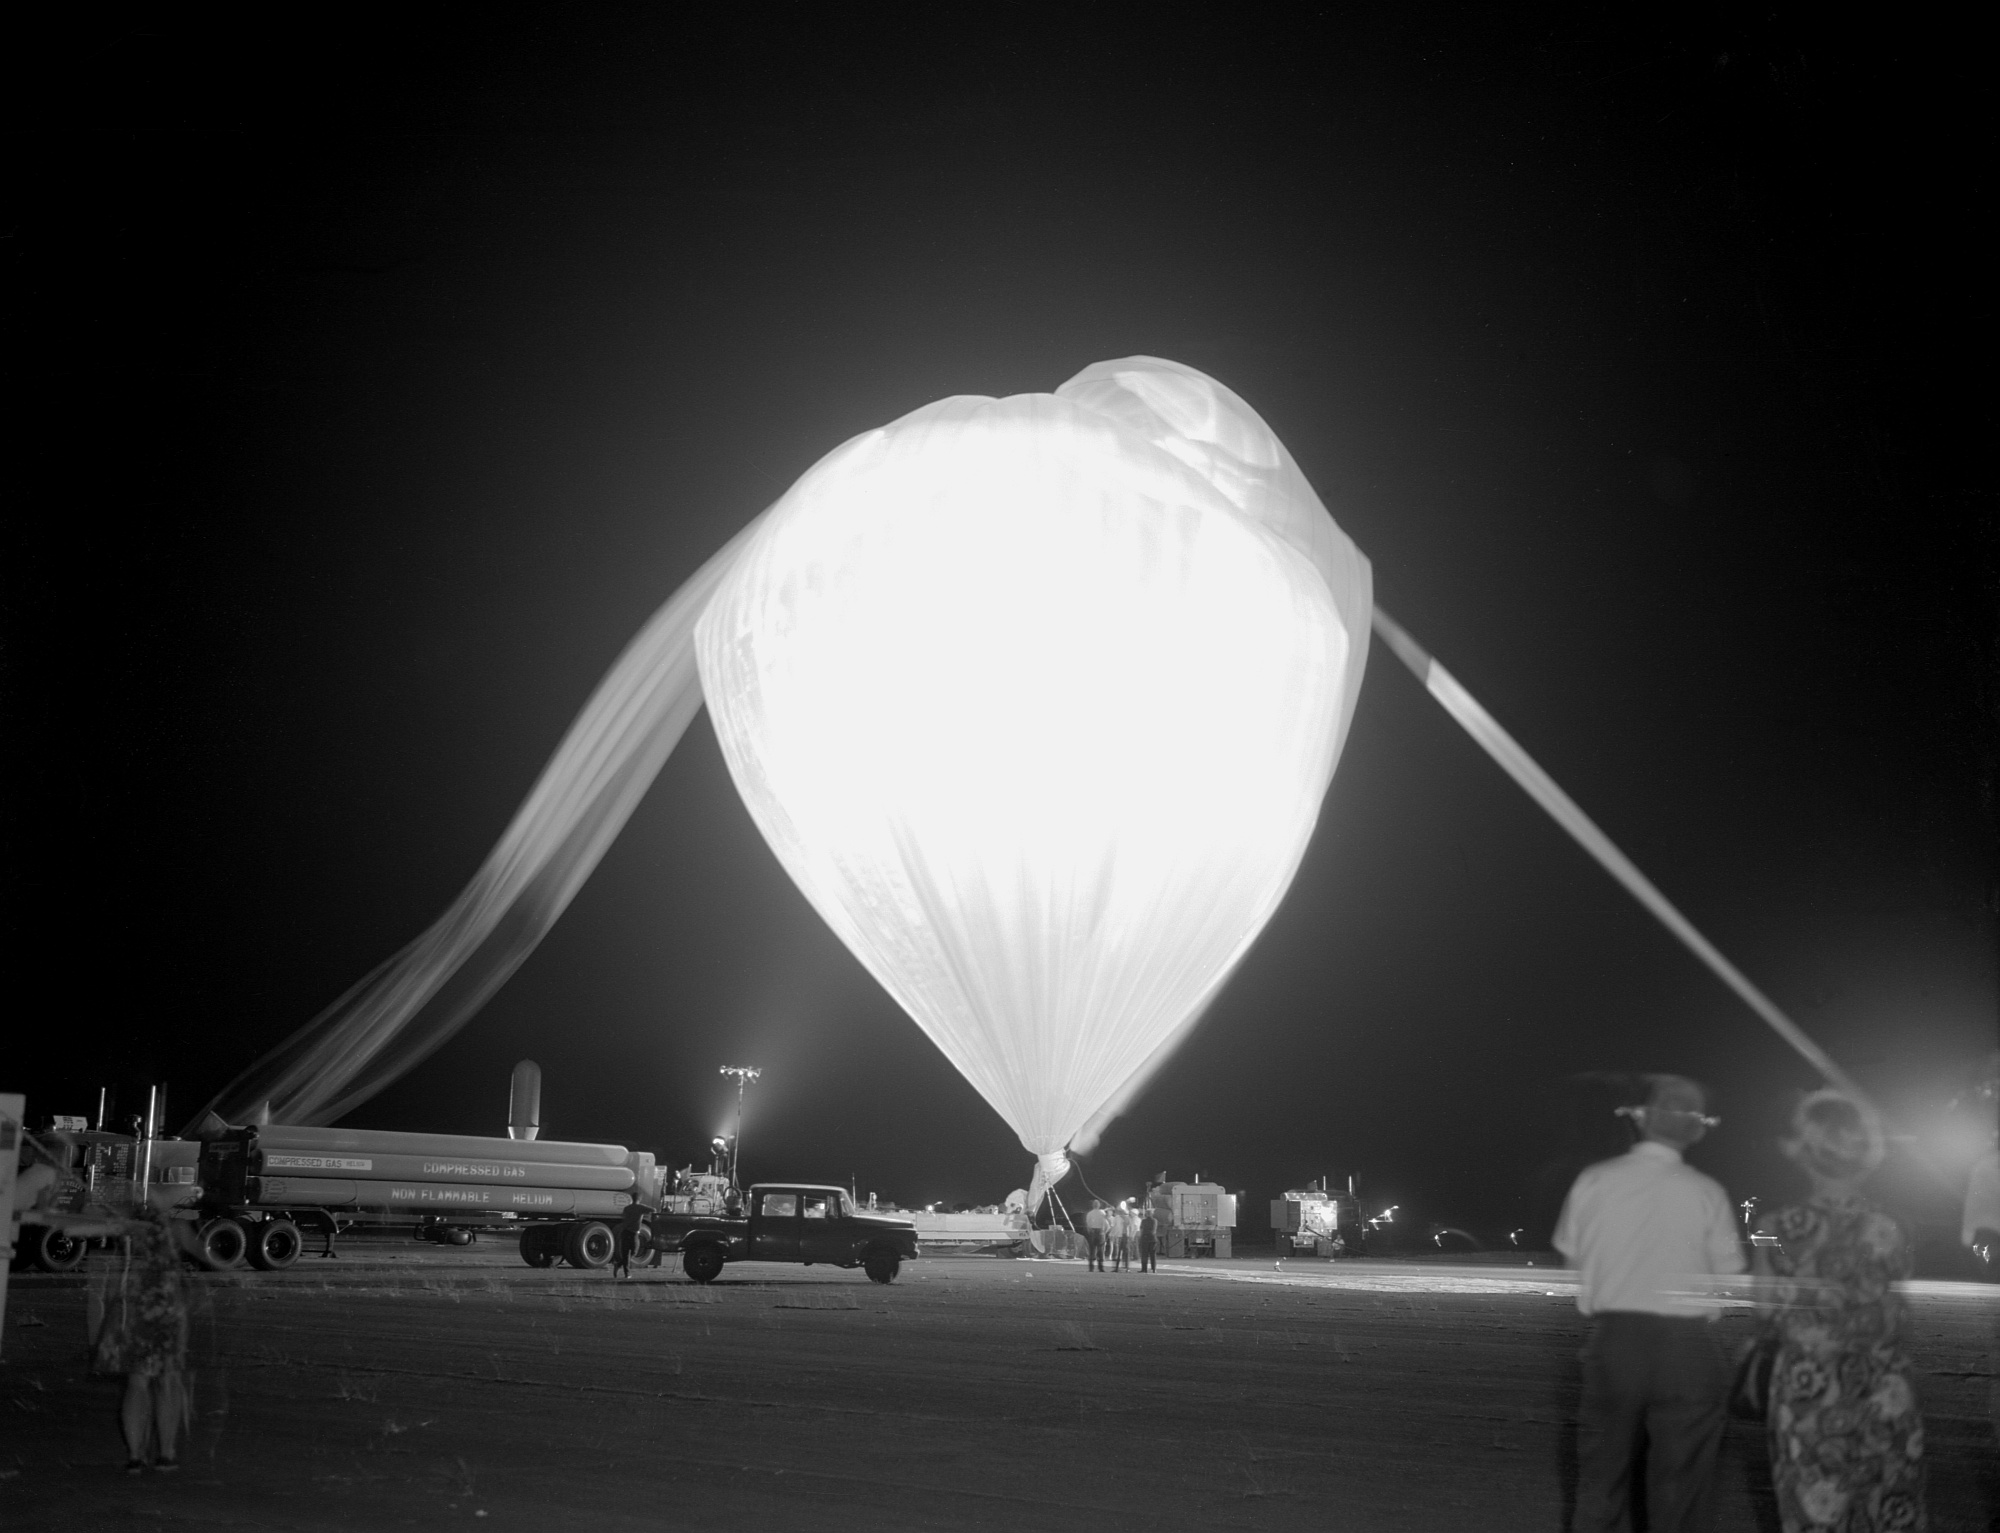 Before dawn, helium is pumped into the first phase of the two-stage 